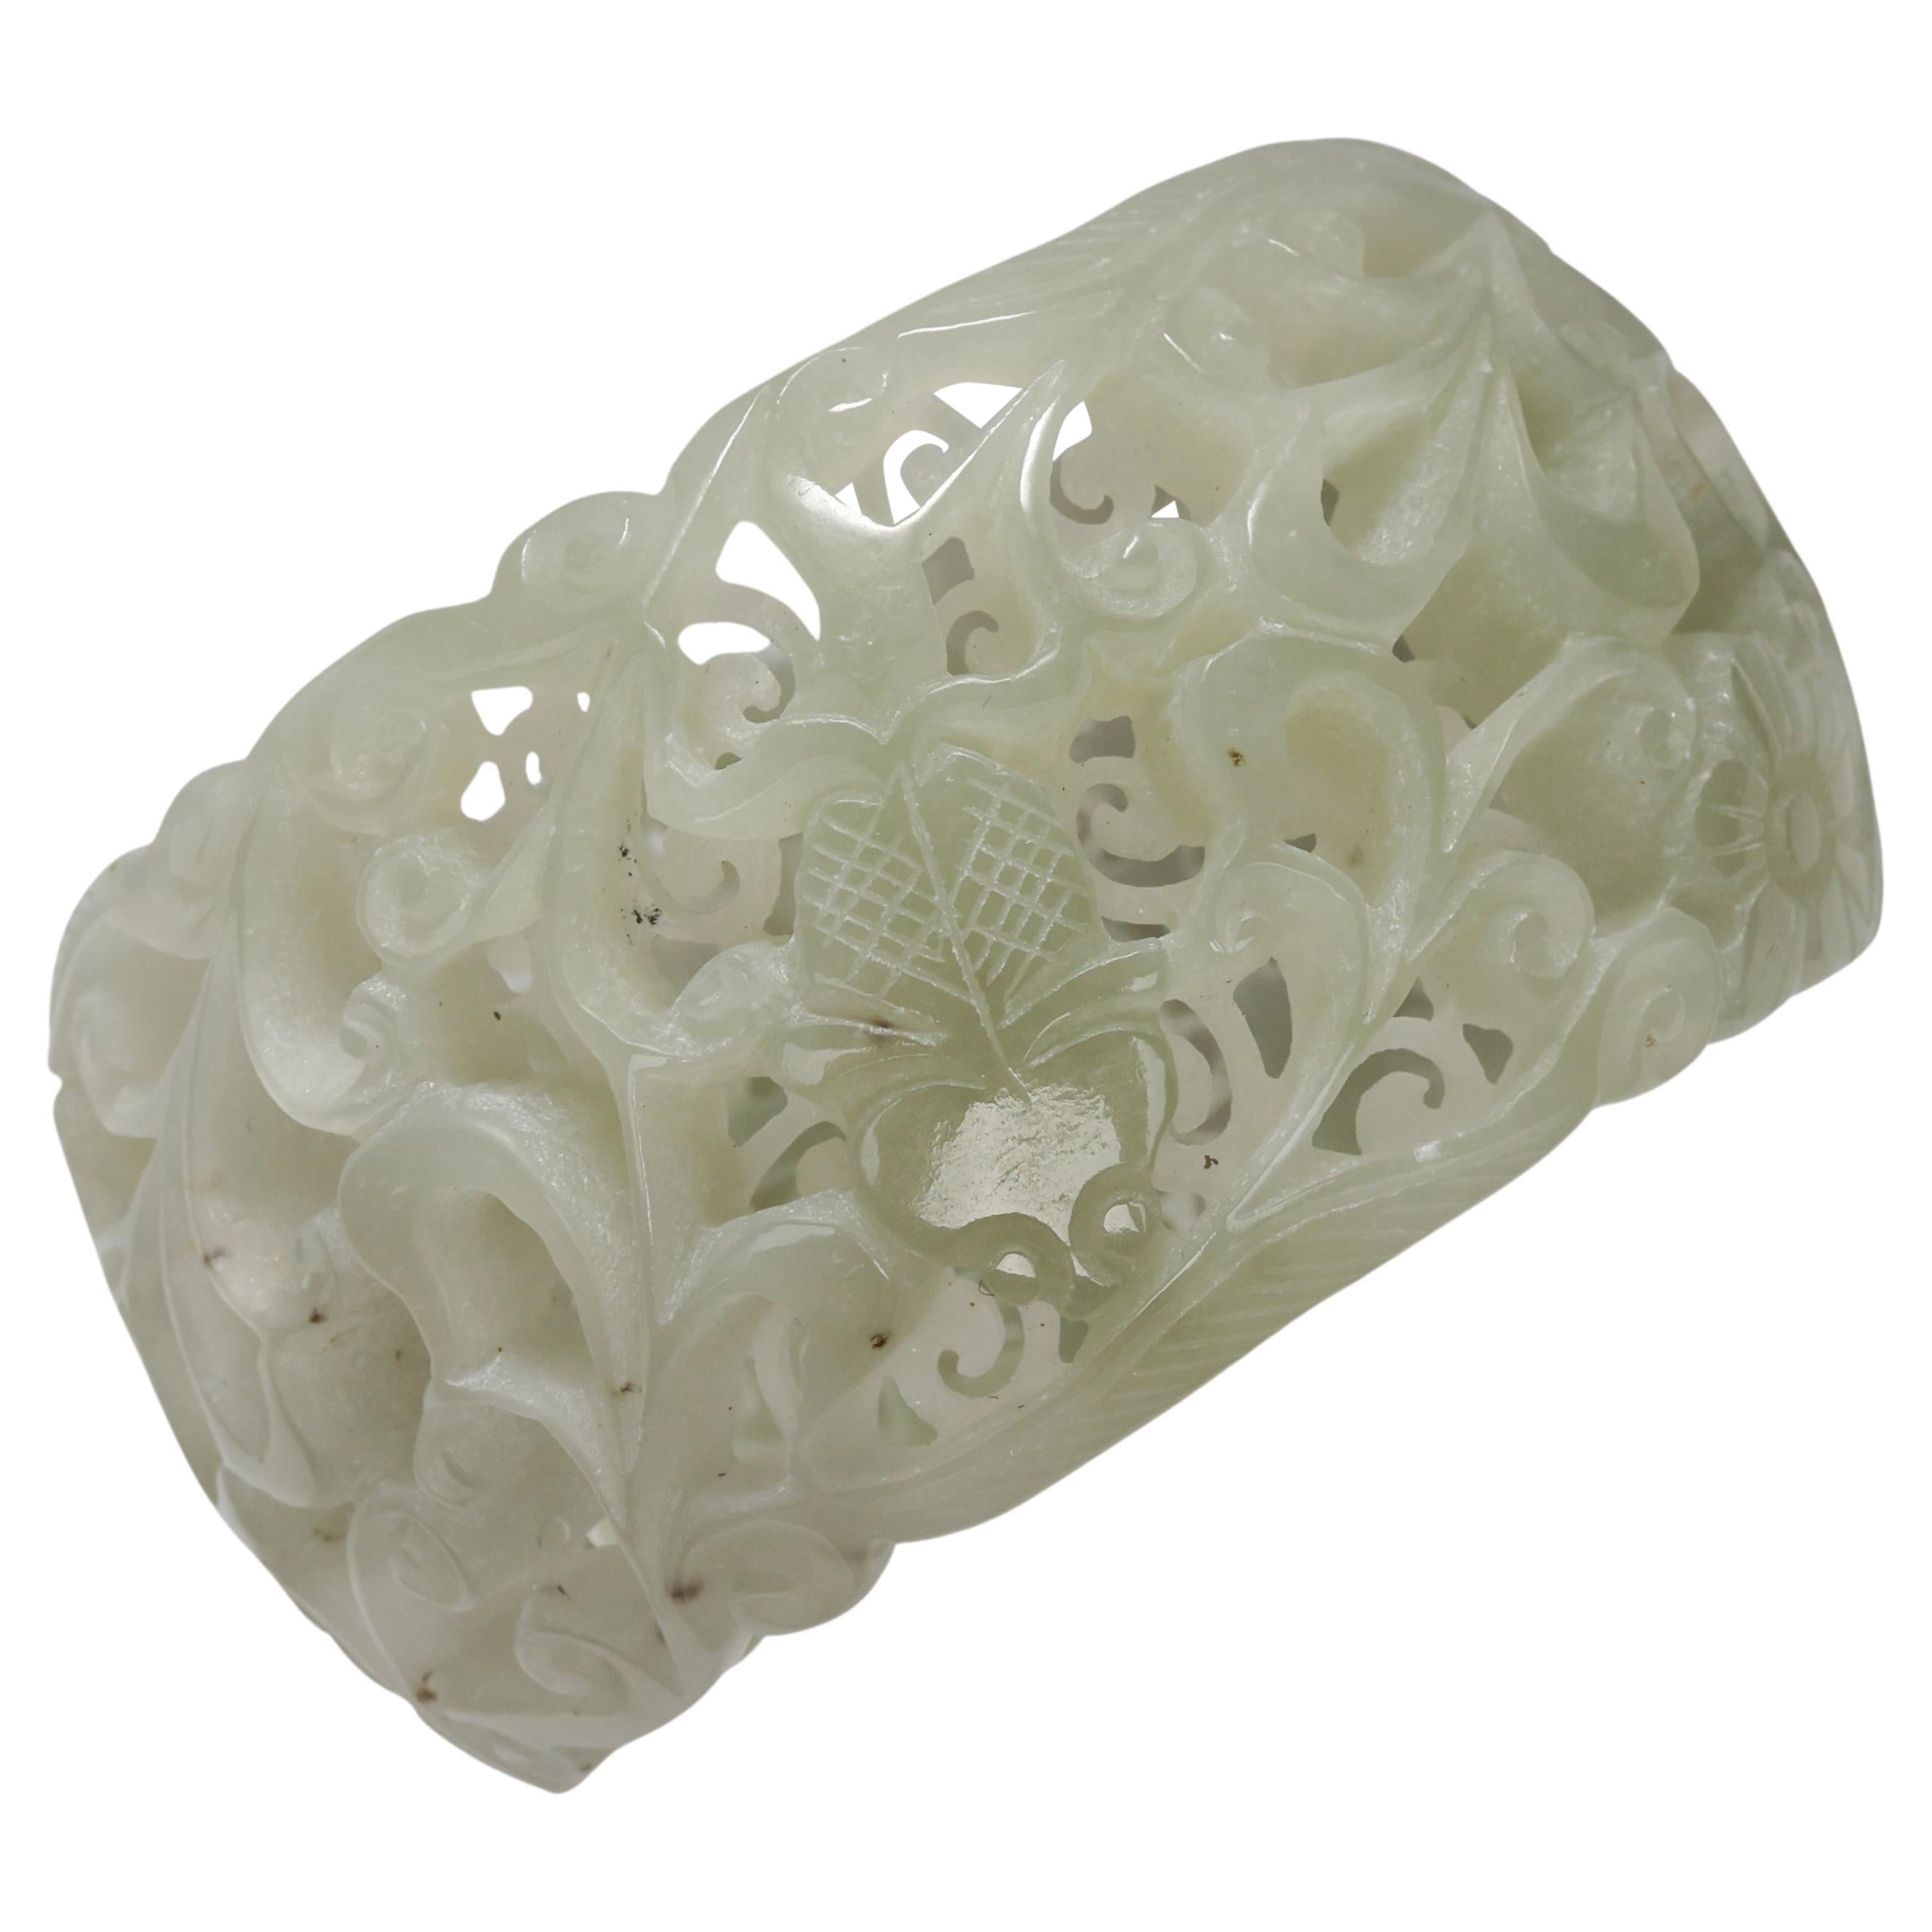 Jade Bangle Intricately Carved & Pierced Certified Untreated White Nephrite